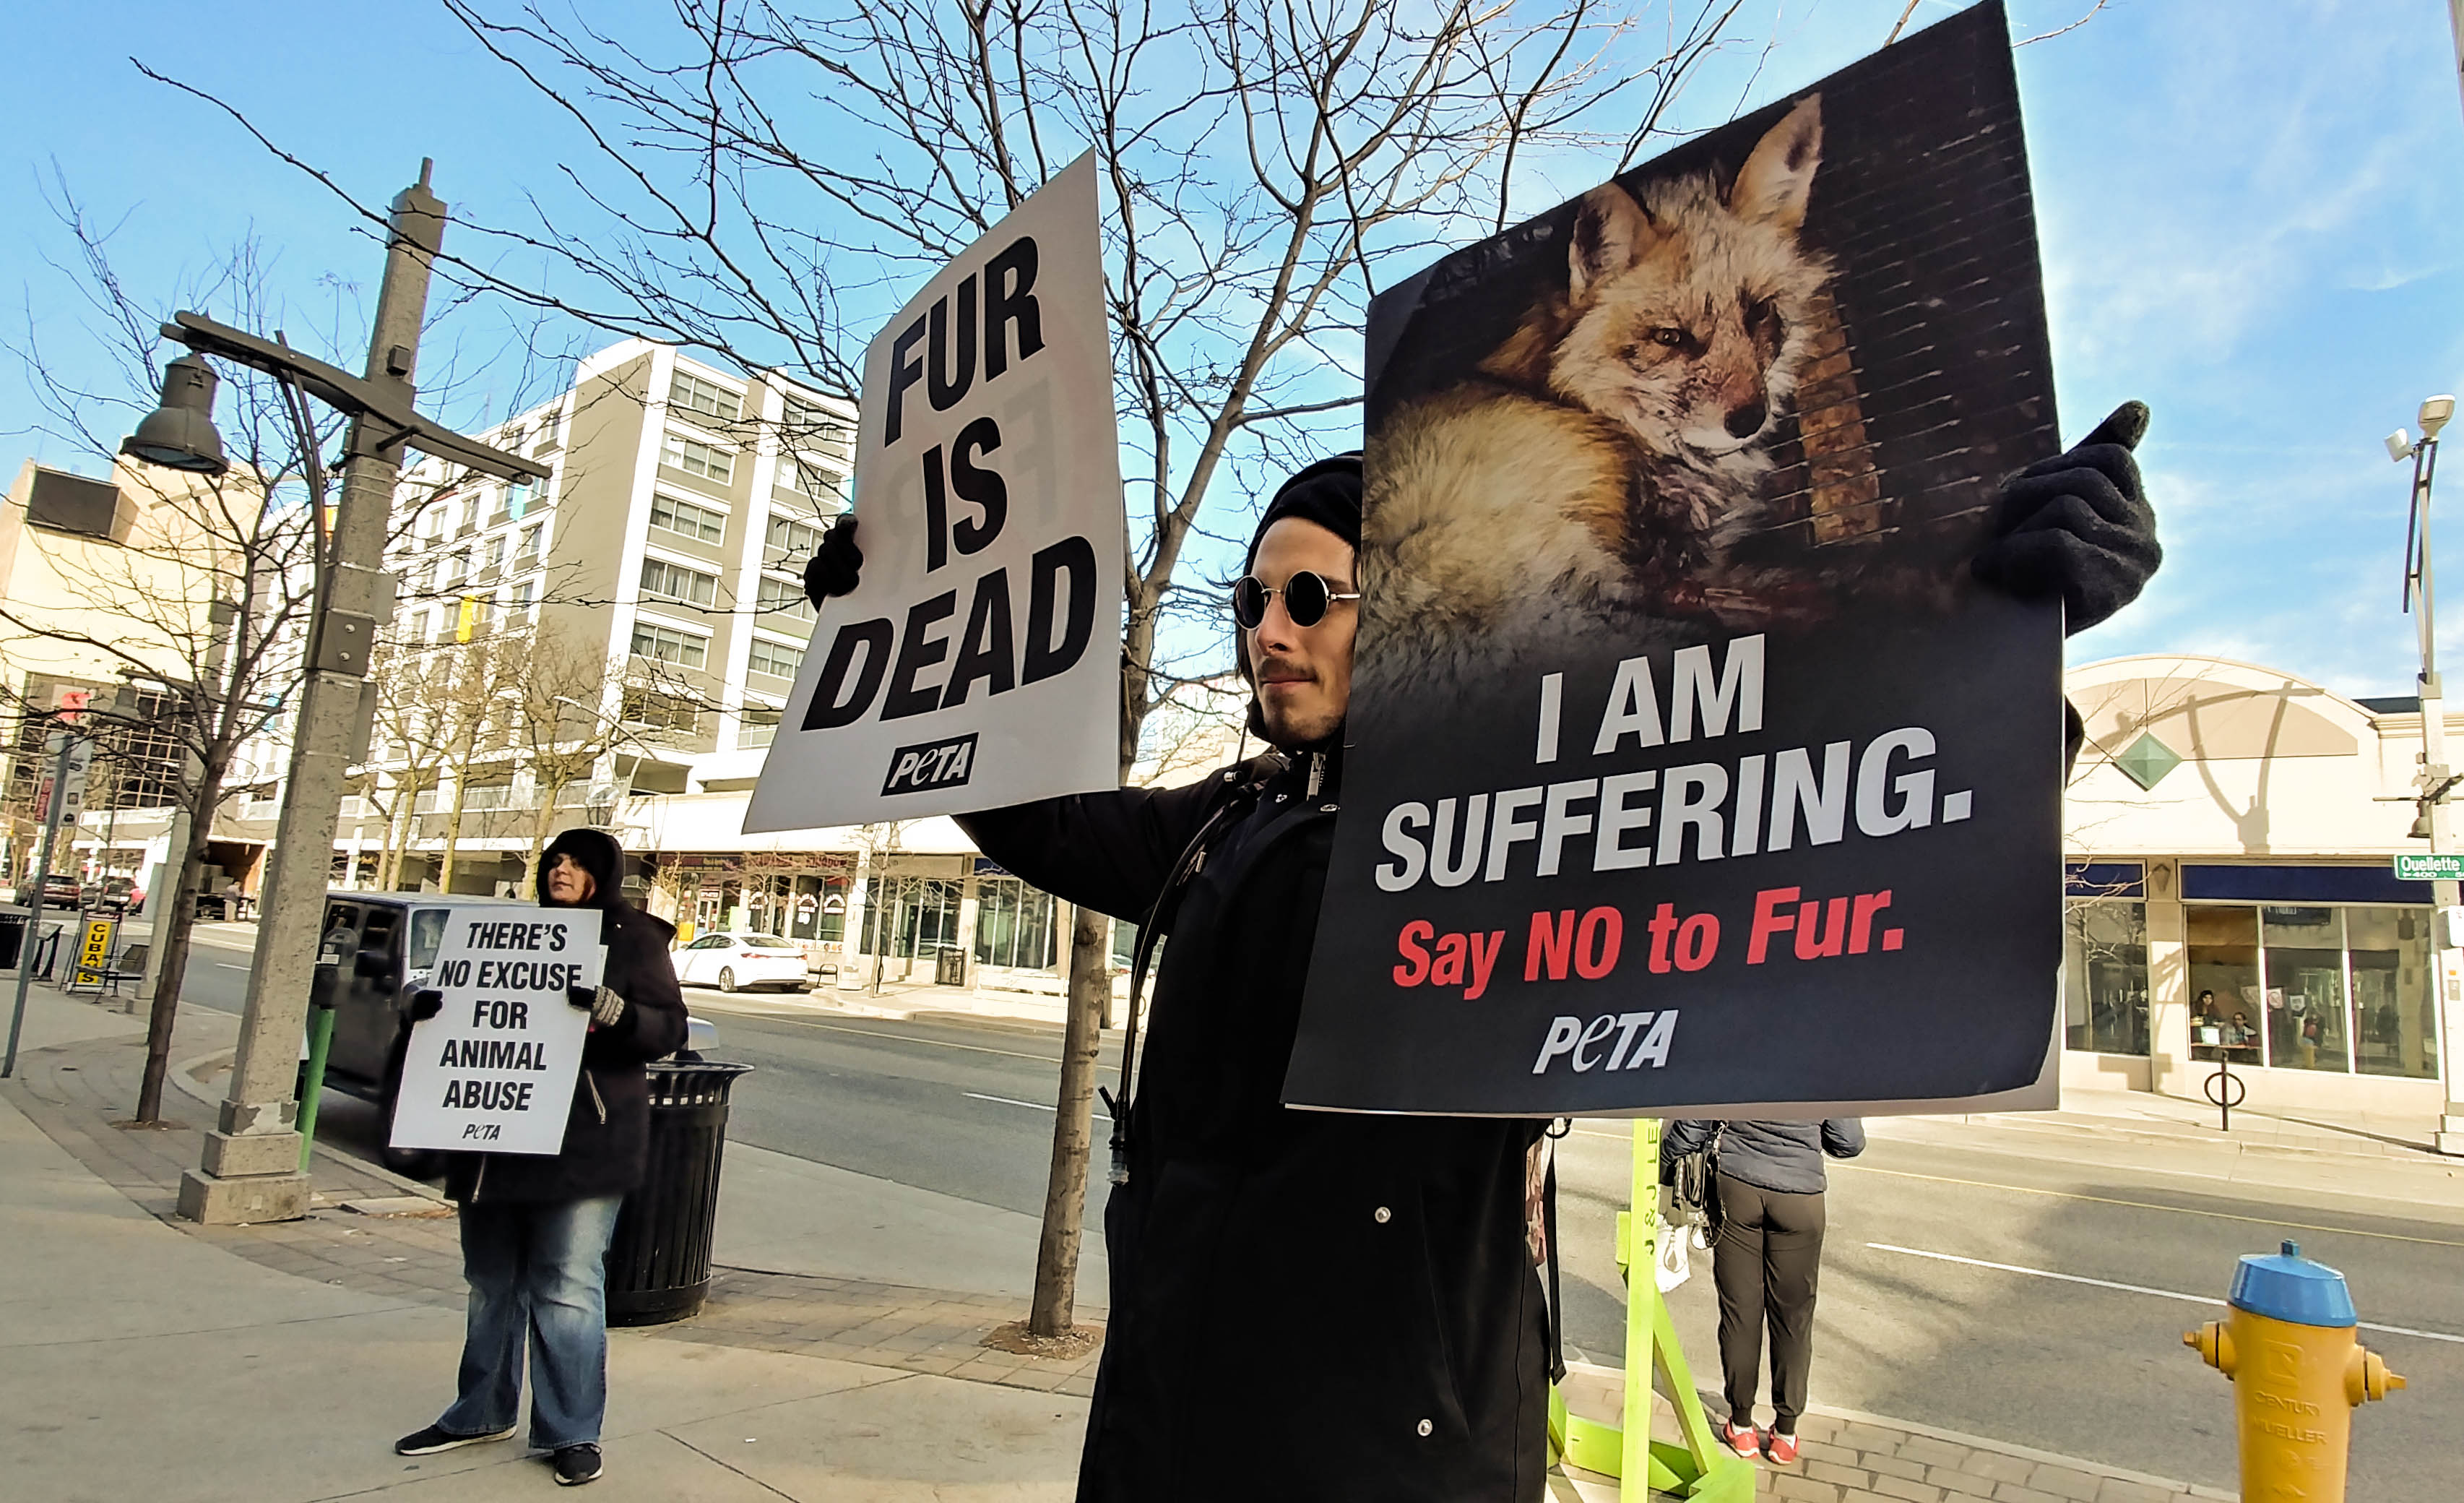 Protesters stand against animal cruelty | The MediaPlex